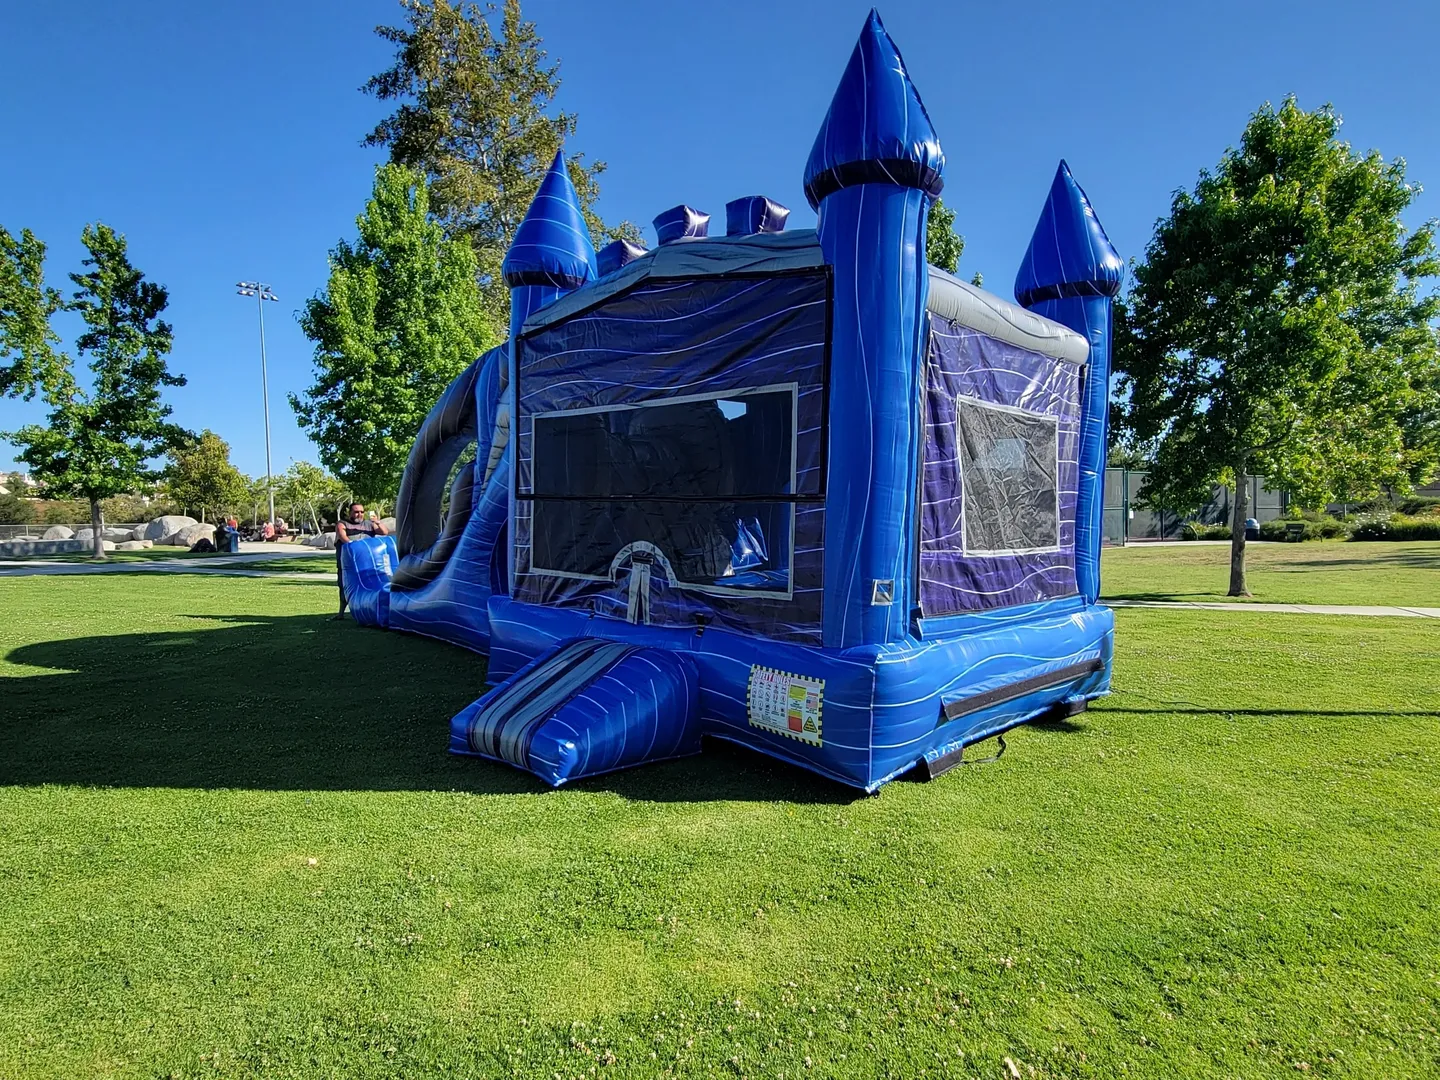 A blue and silver bouncy castle in the middle of a park.